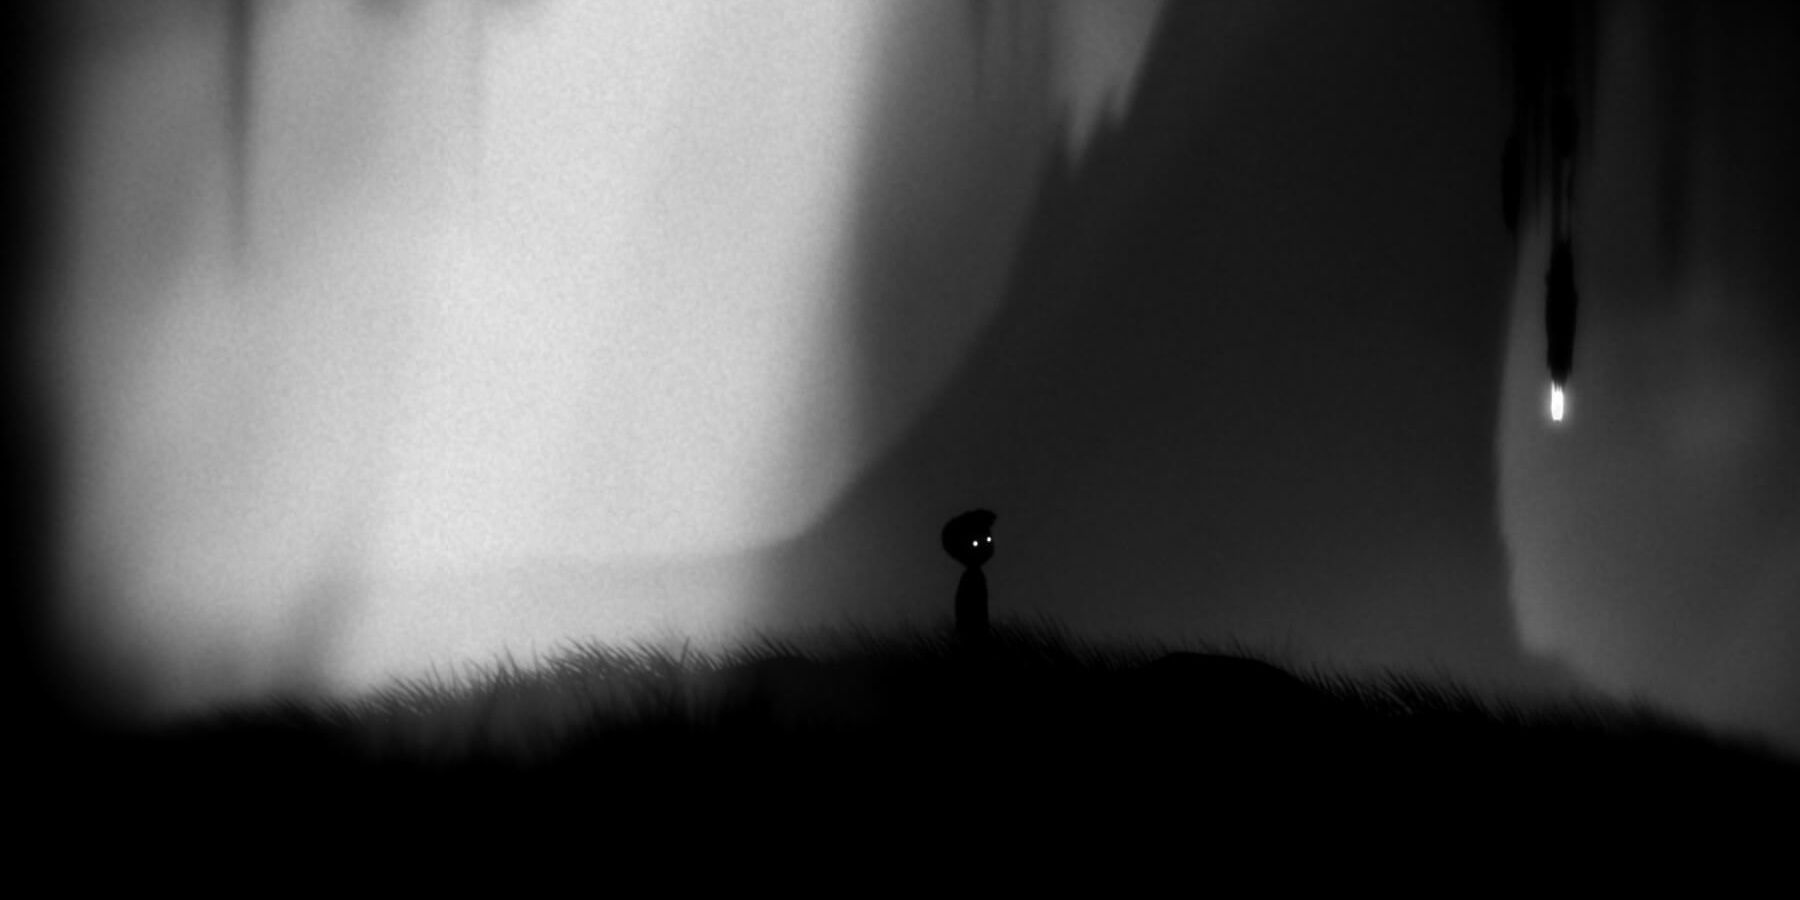 'the boy' in LIMBO in an open area looking at a glowing object